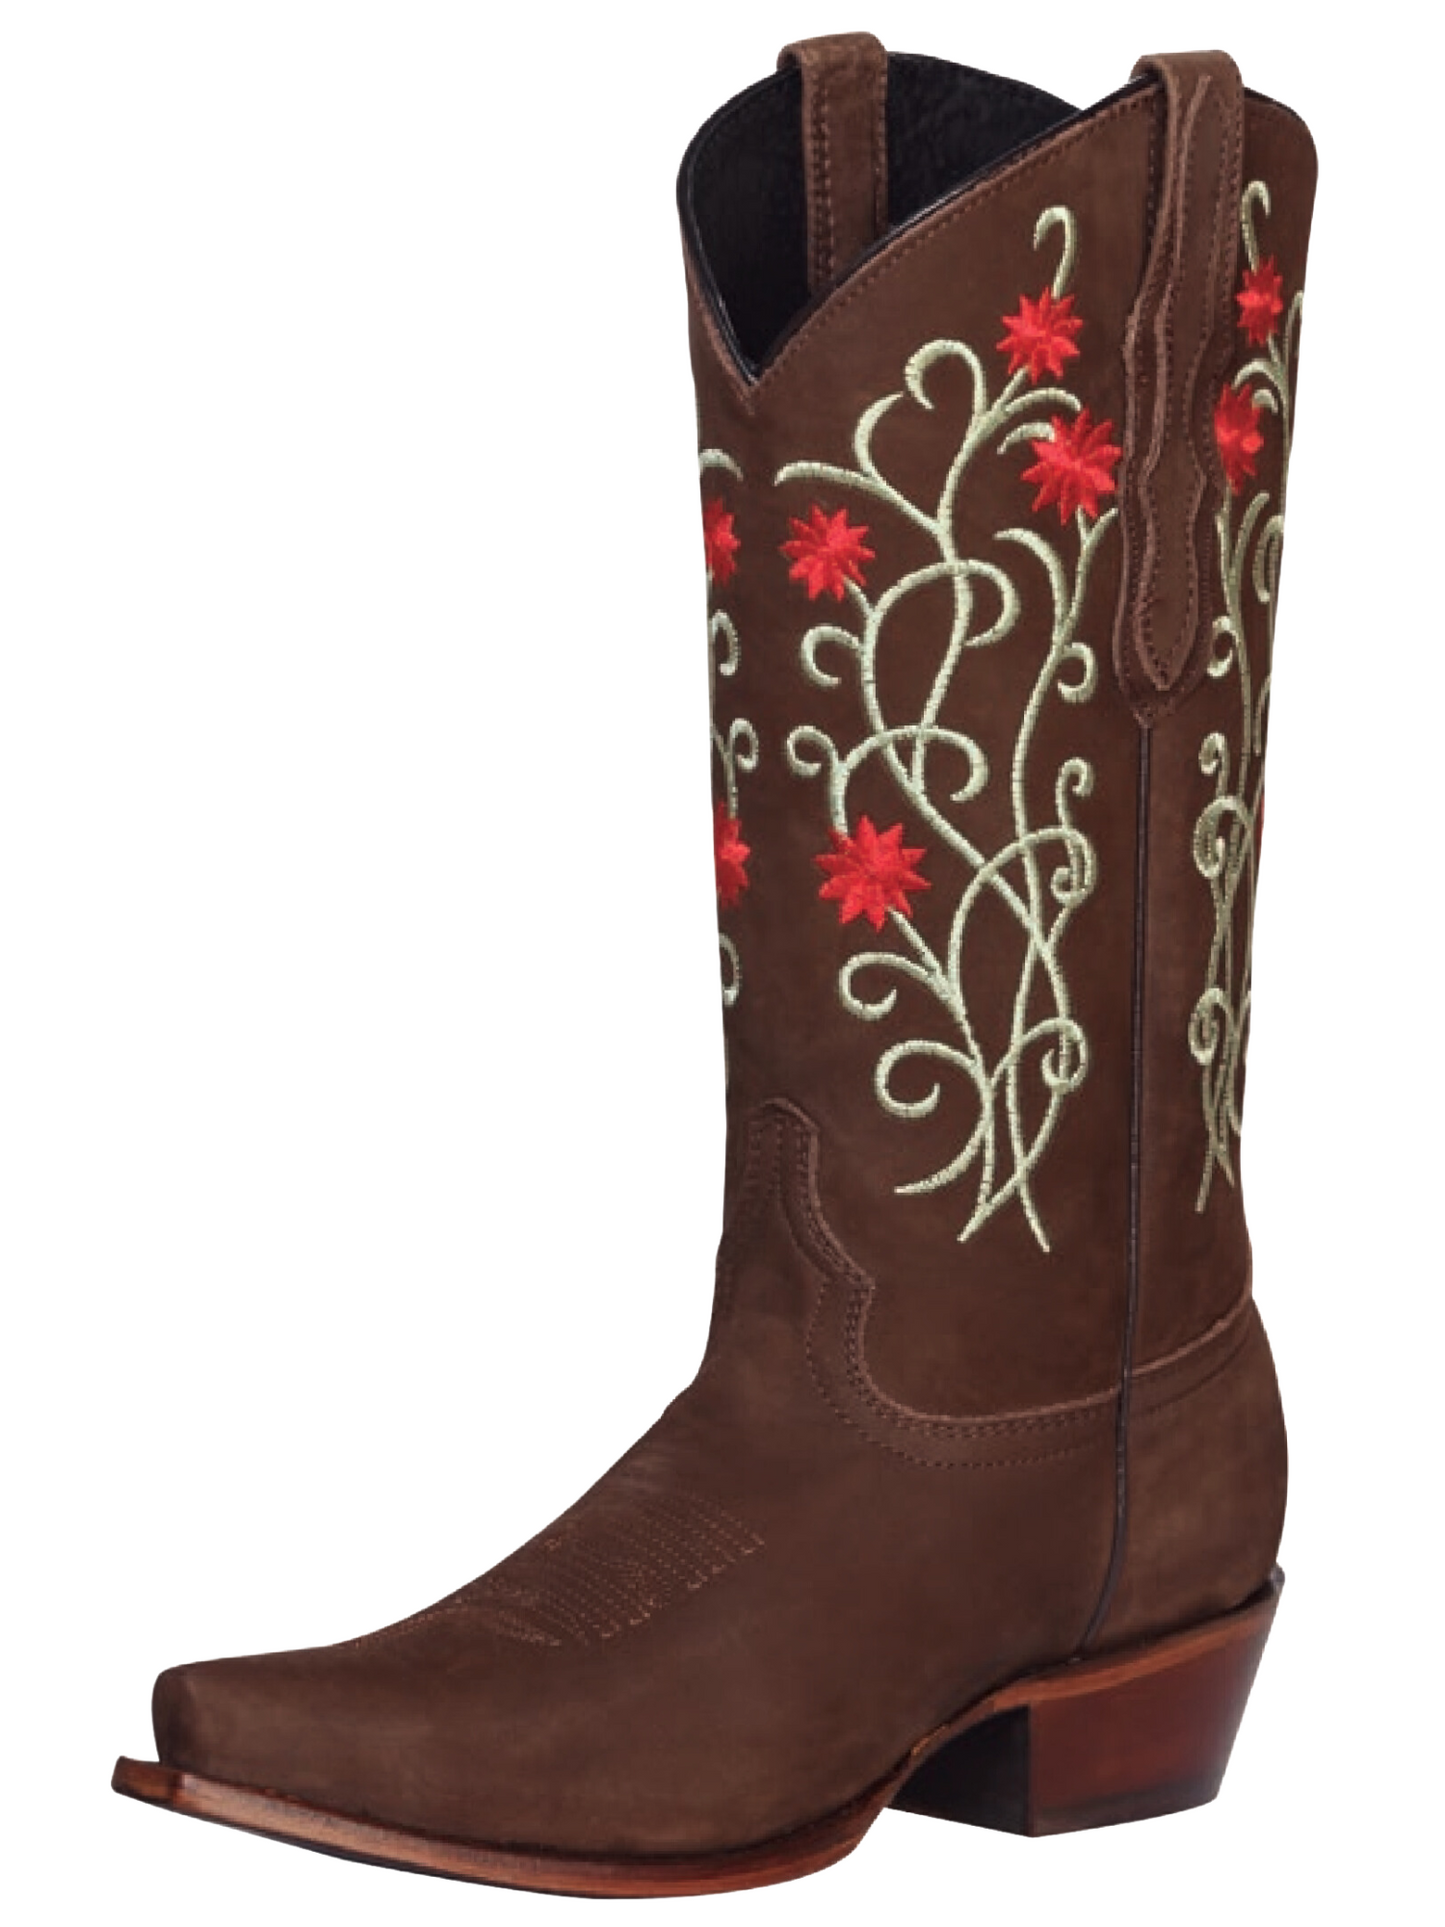 Retro Cowboy Boots with Nobuck Leather Flowers Embroidered Tube for Women 'El General' - ID: 41789